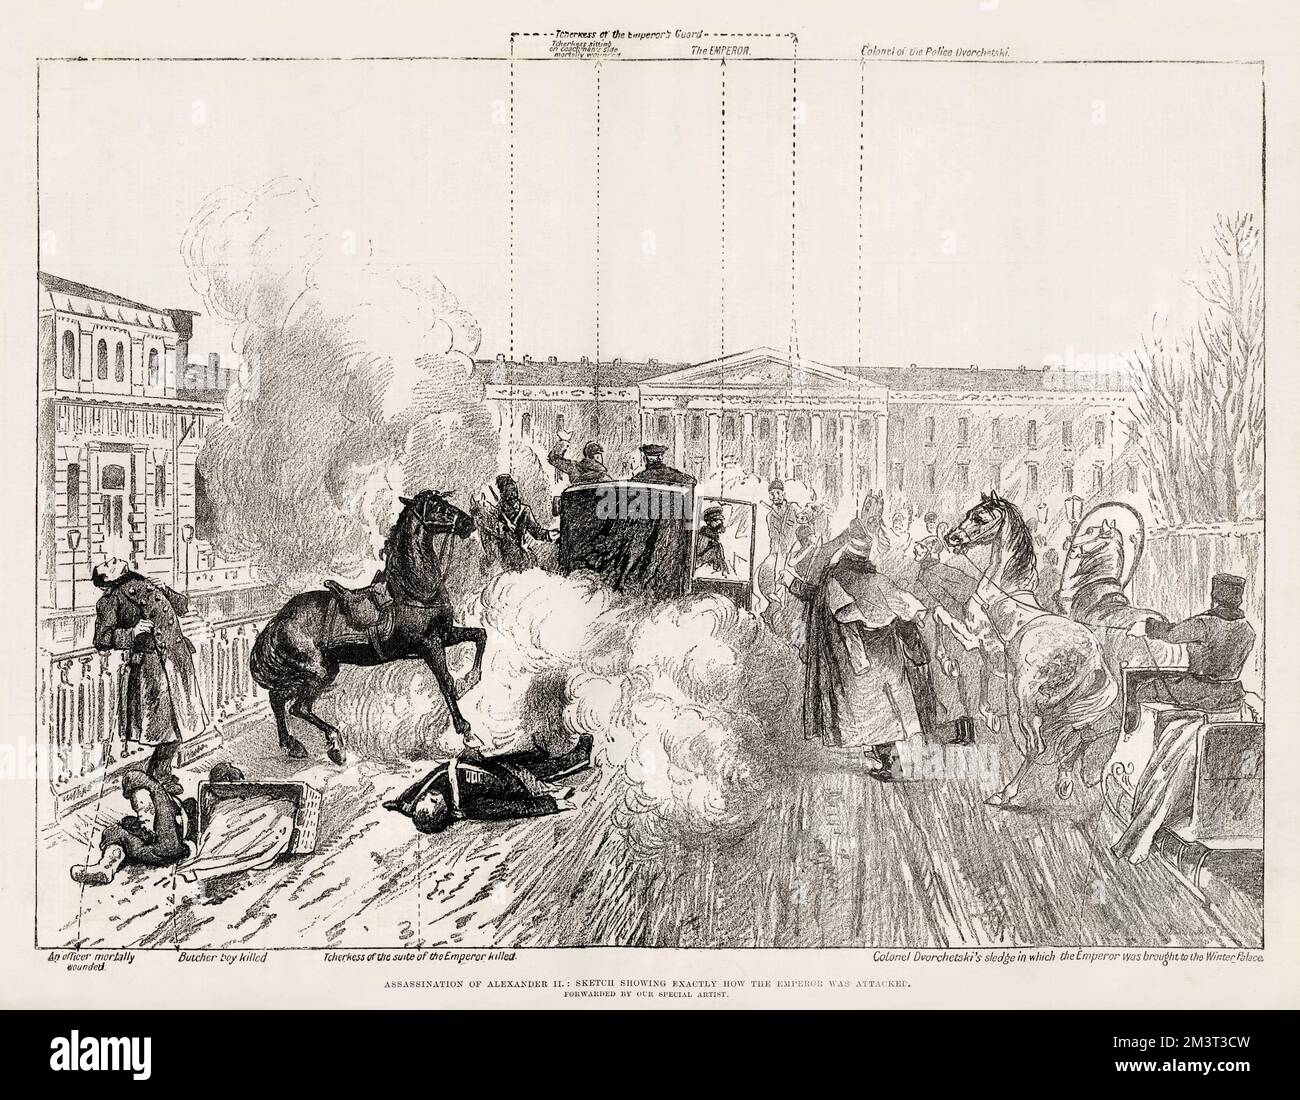 Assassination of Alexander II: sketch showing exactly how the emperor was attacked. Alexander II, Emperor of Russia, assassinated in Saint Petersburg on 13th March 1881. Stock Photo